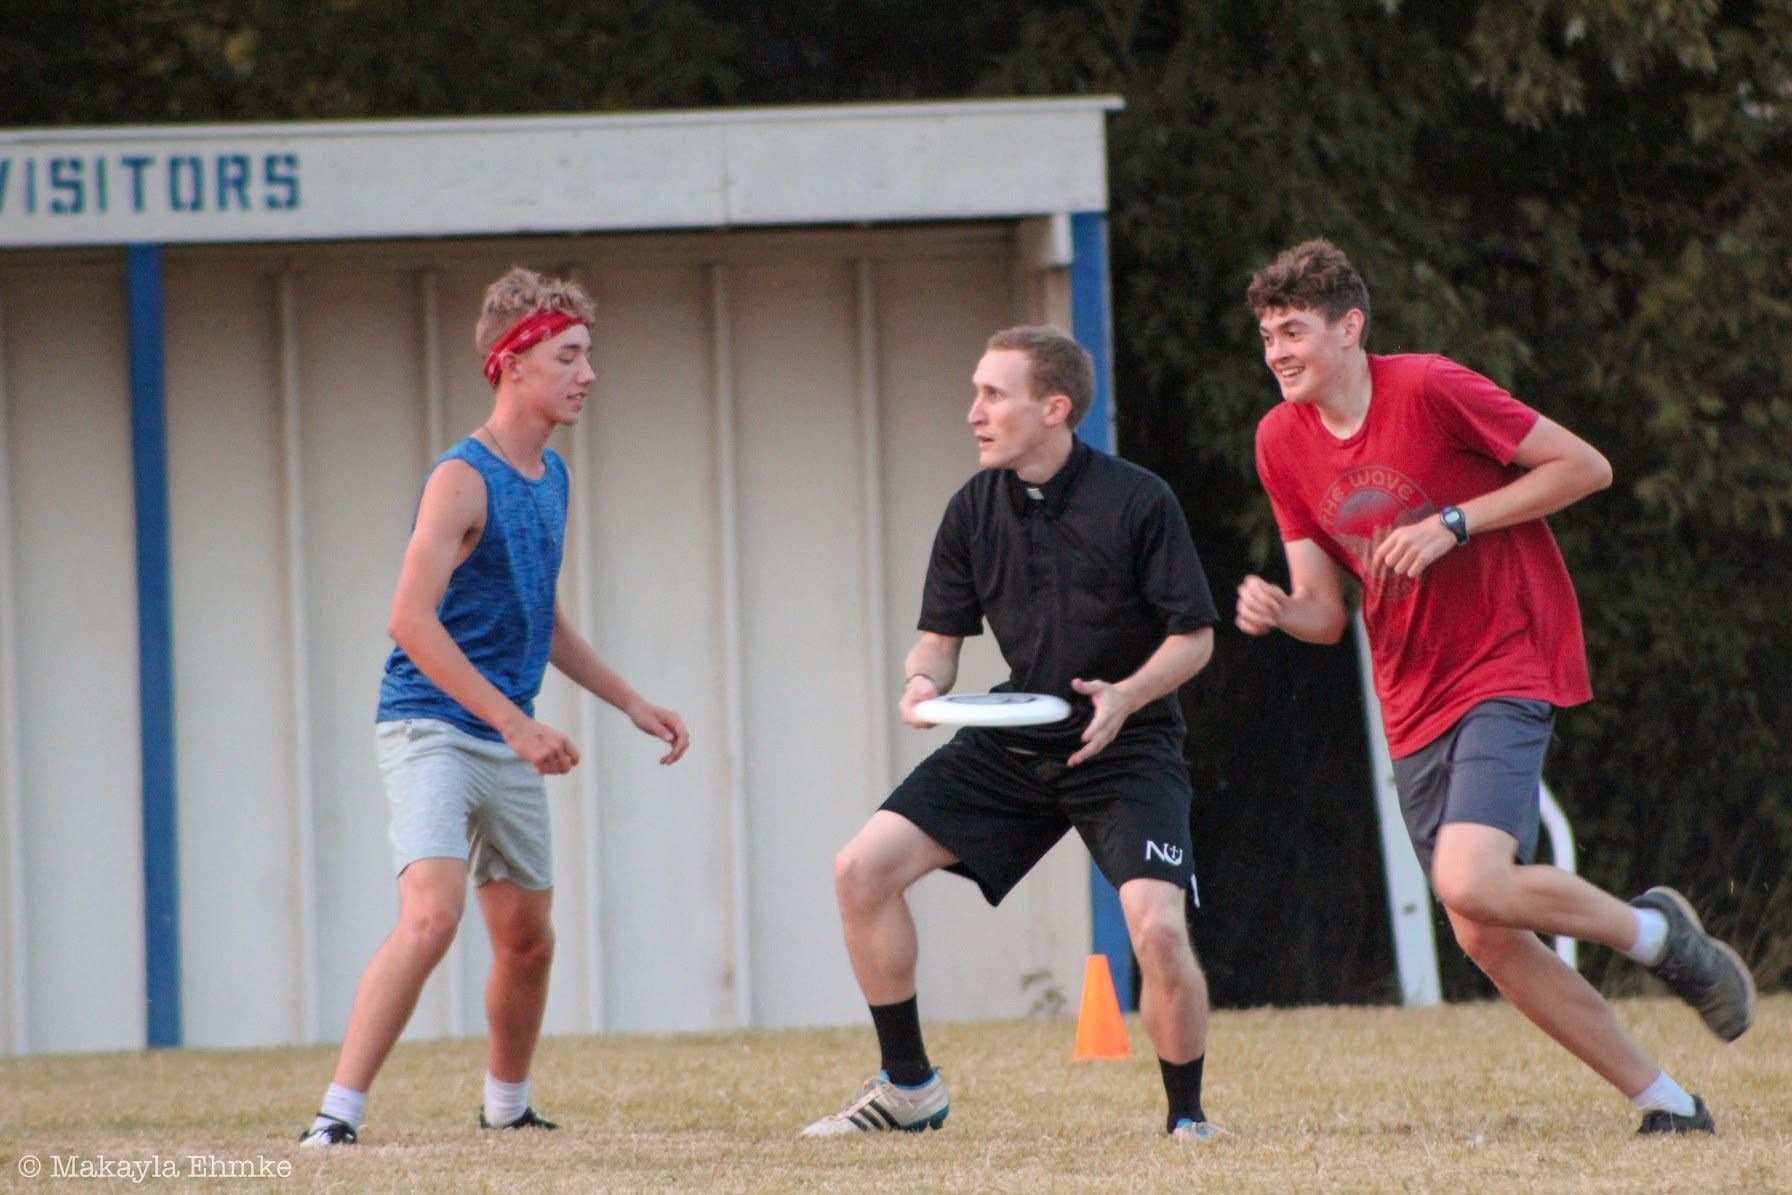 Campus Ministry reaches high schoolers through sports